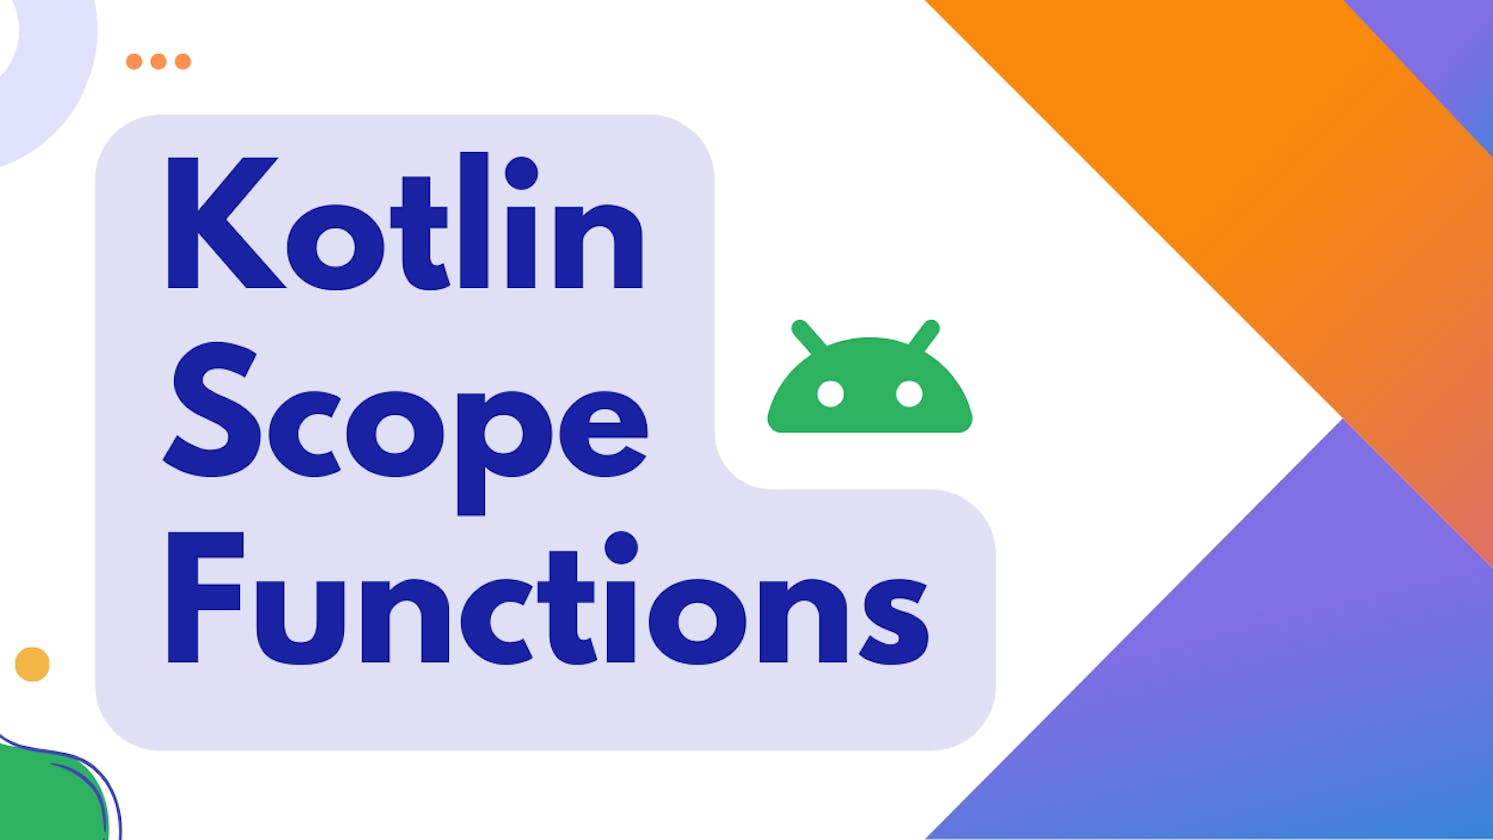 A Deep Dive into Kotlin's Scope Functions